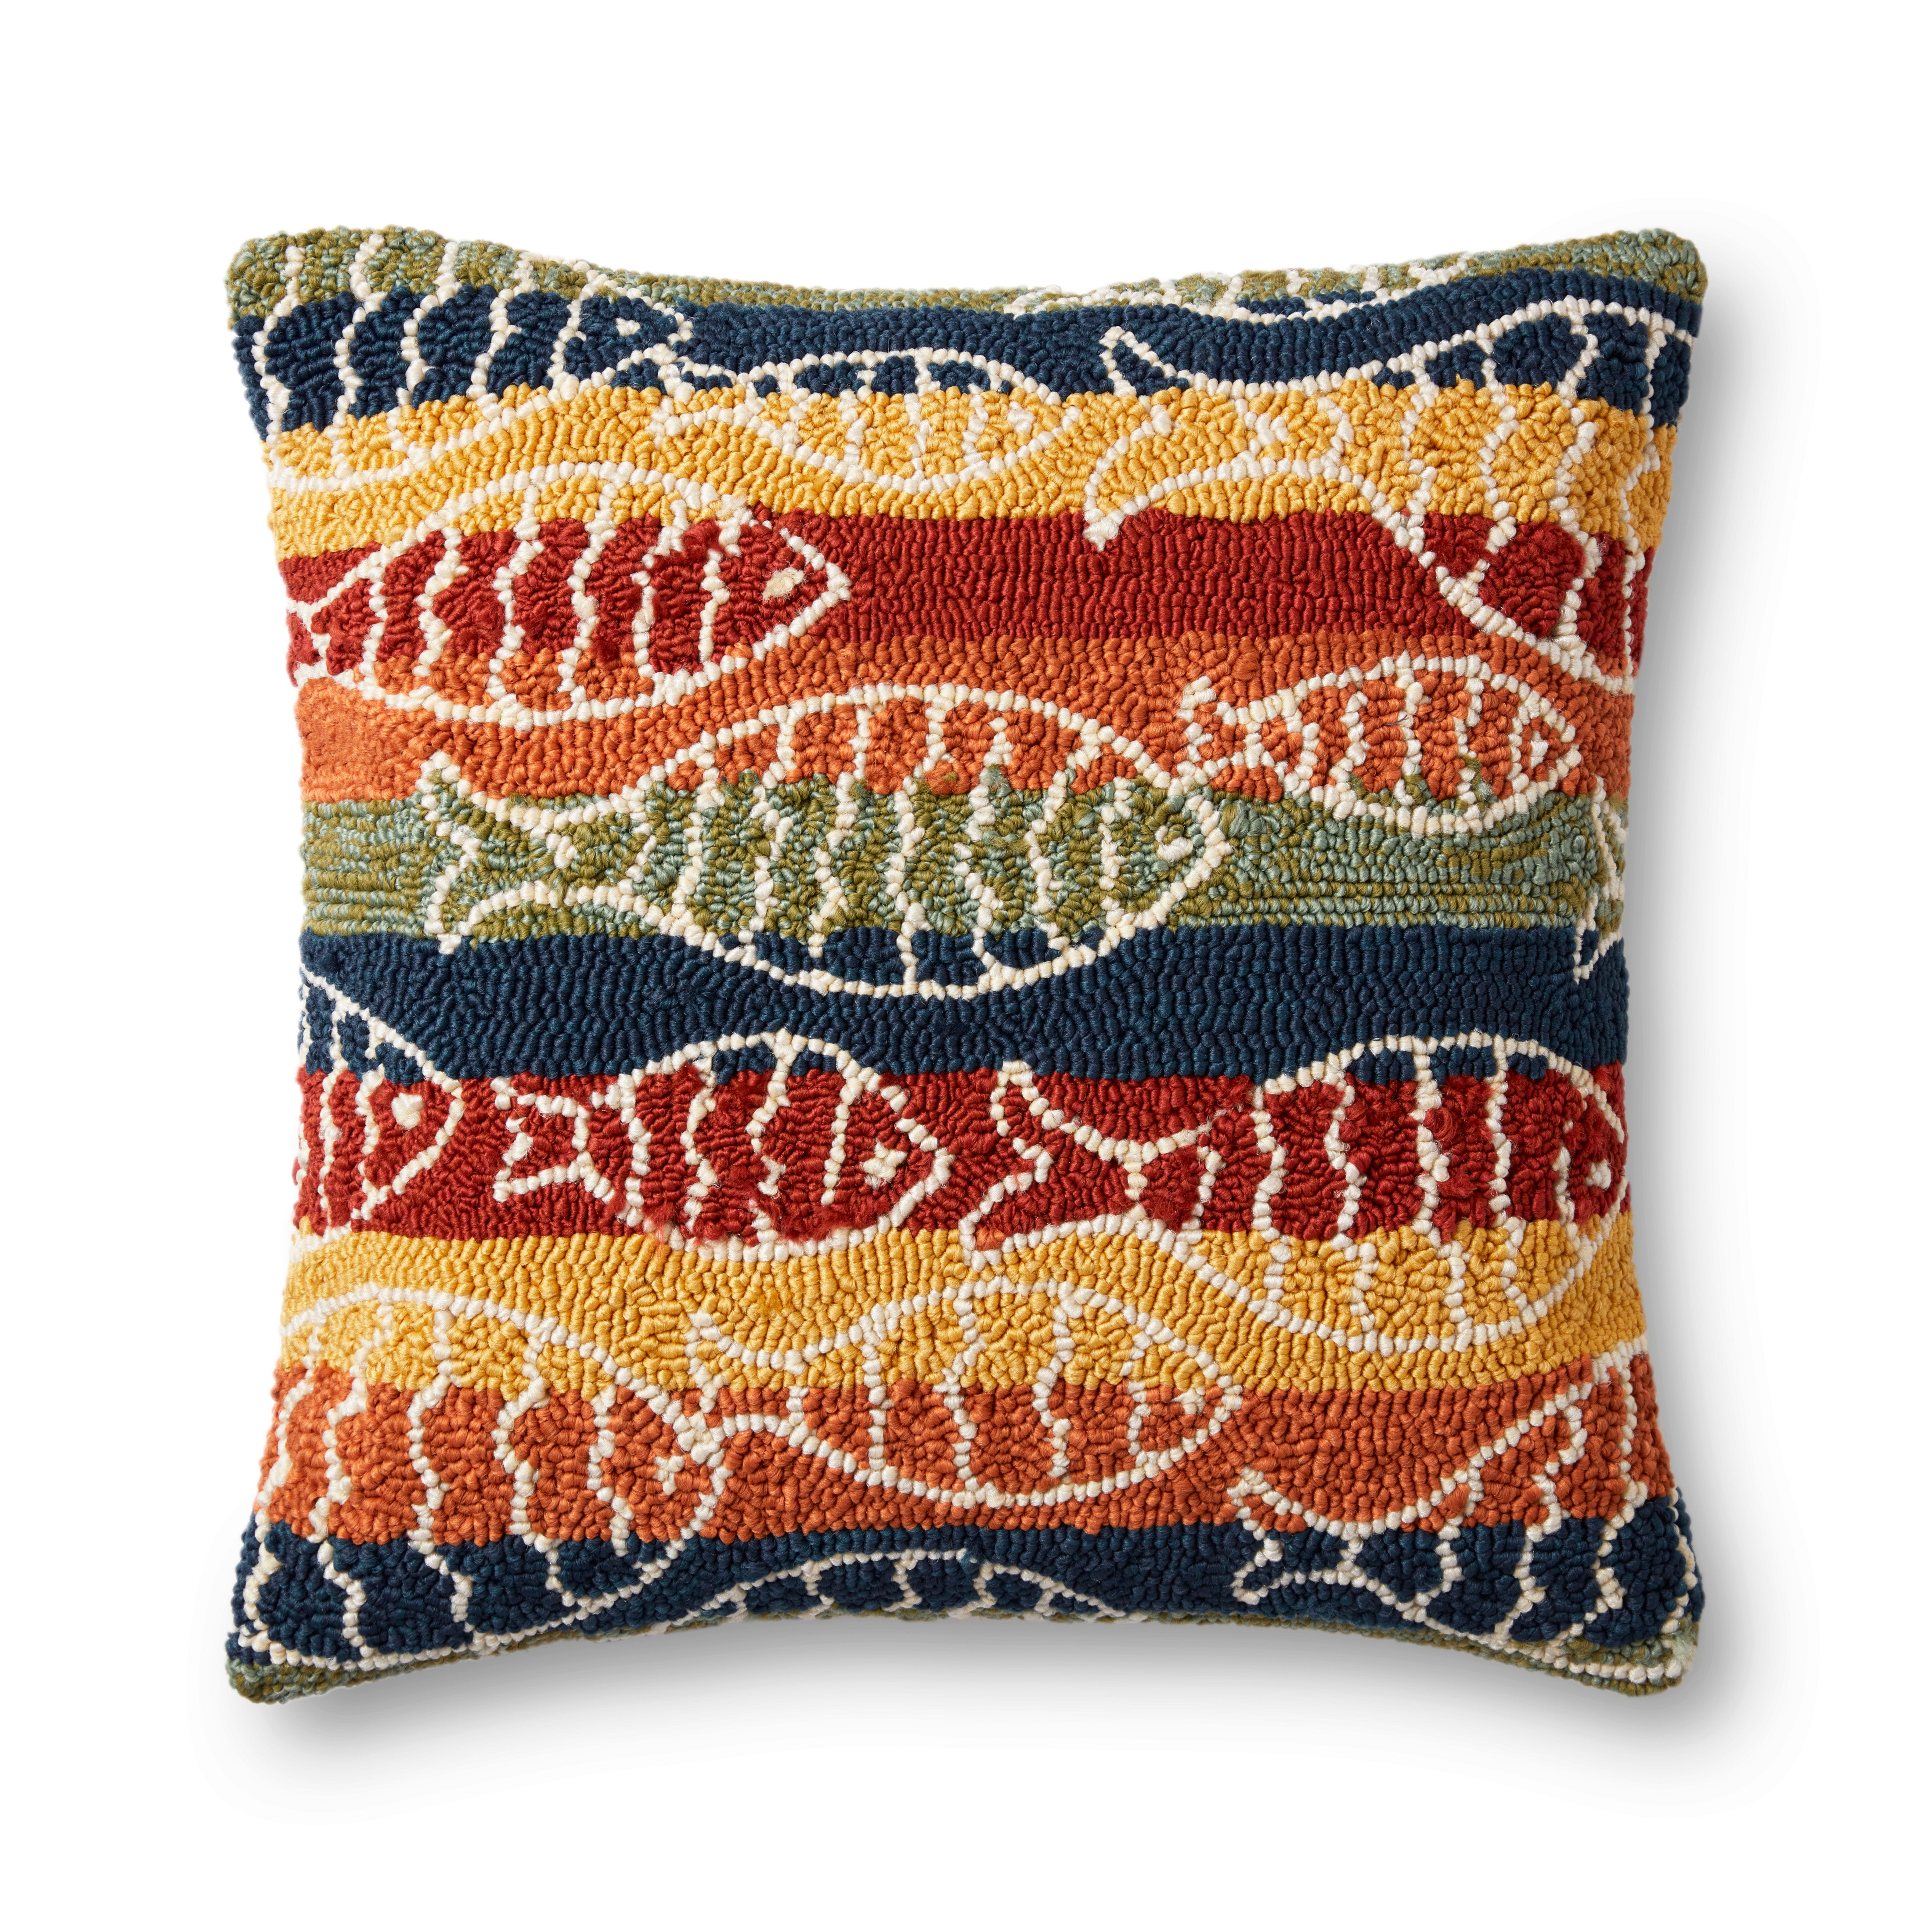 In/Out Hand Hooked Multi Fish Pattern Decorative Square Pillow